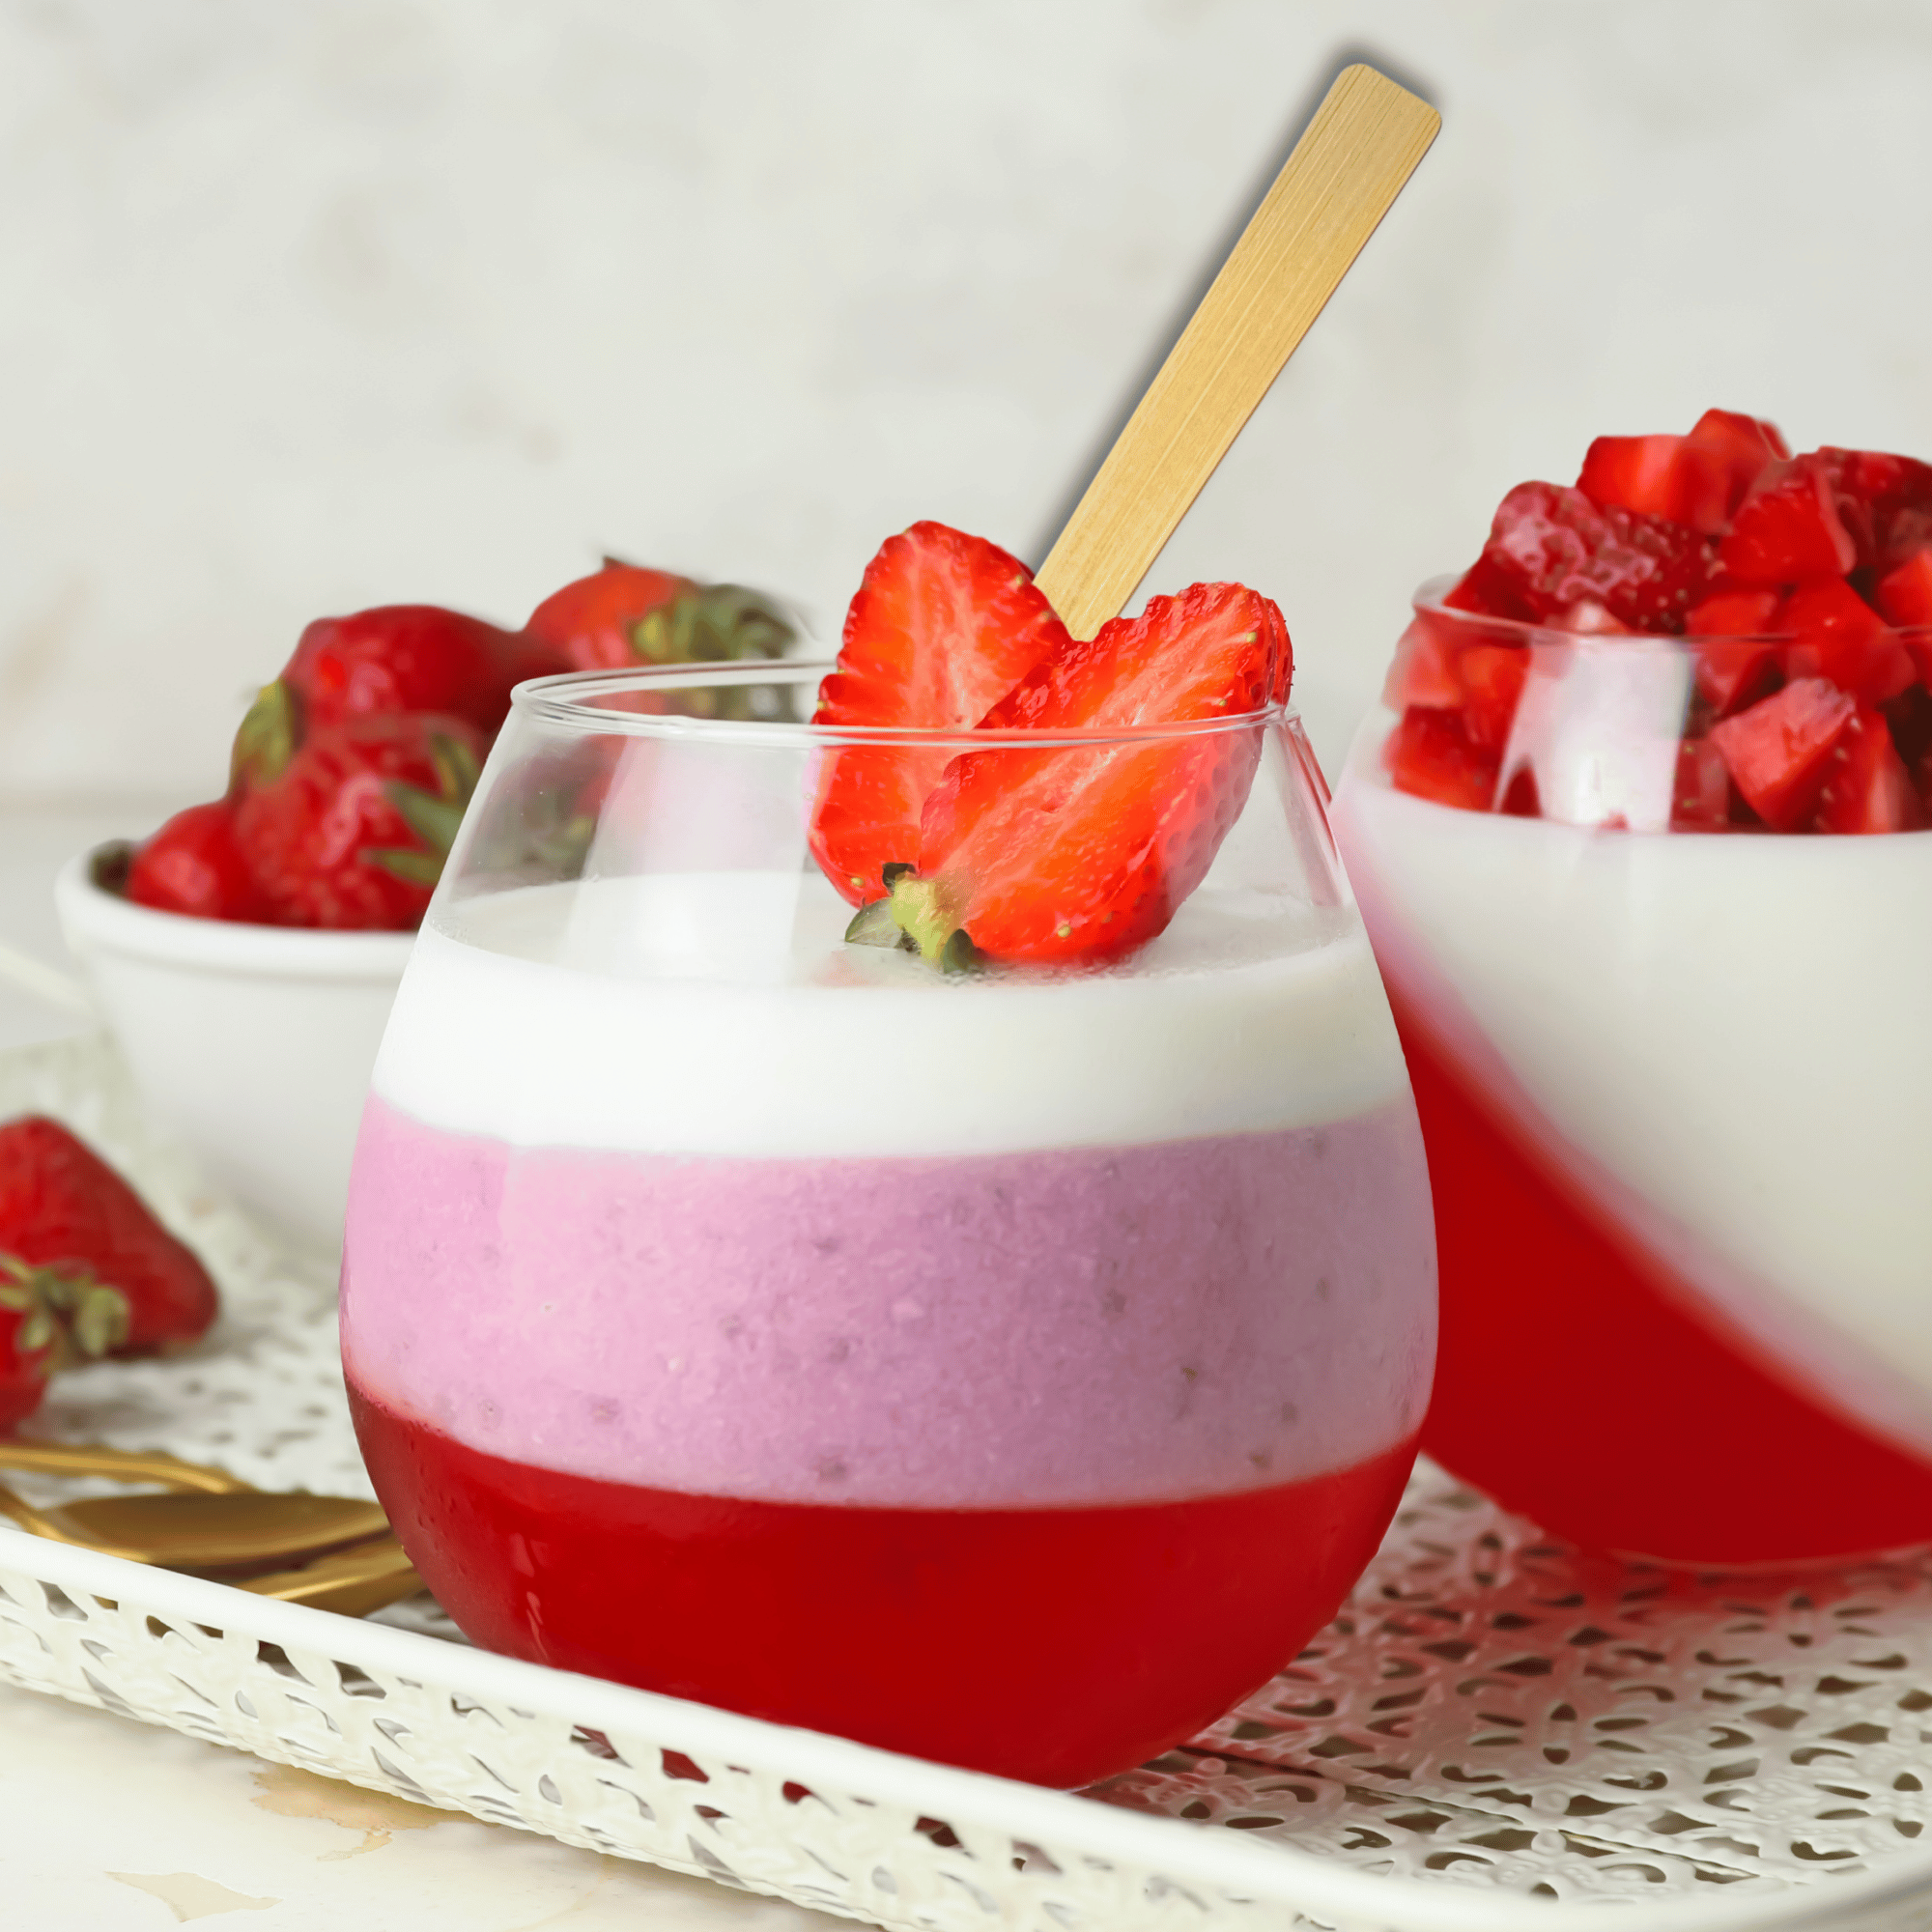 An elegant dessert presented in a clear glass showcases layered strawberry jelly and creamy purple mousse topped with a fluffy white cream. A sliced strawberry garnishes the rim and a bamboo spoon from Holy City Straw Co. is inserted, ready for indulgence.